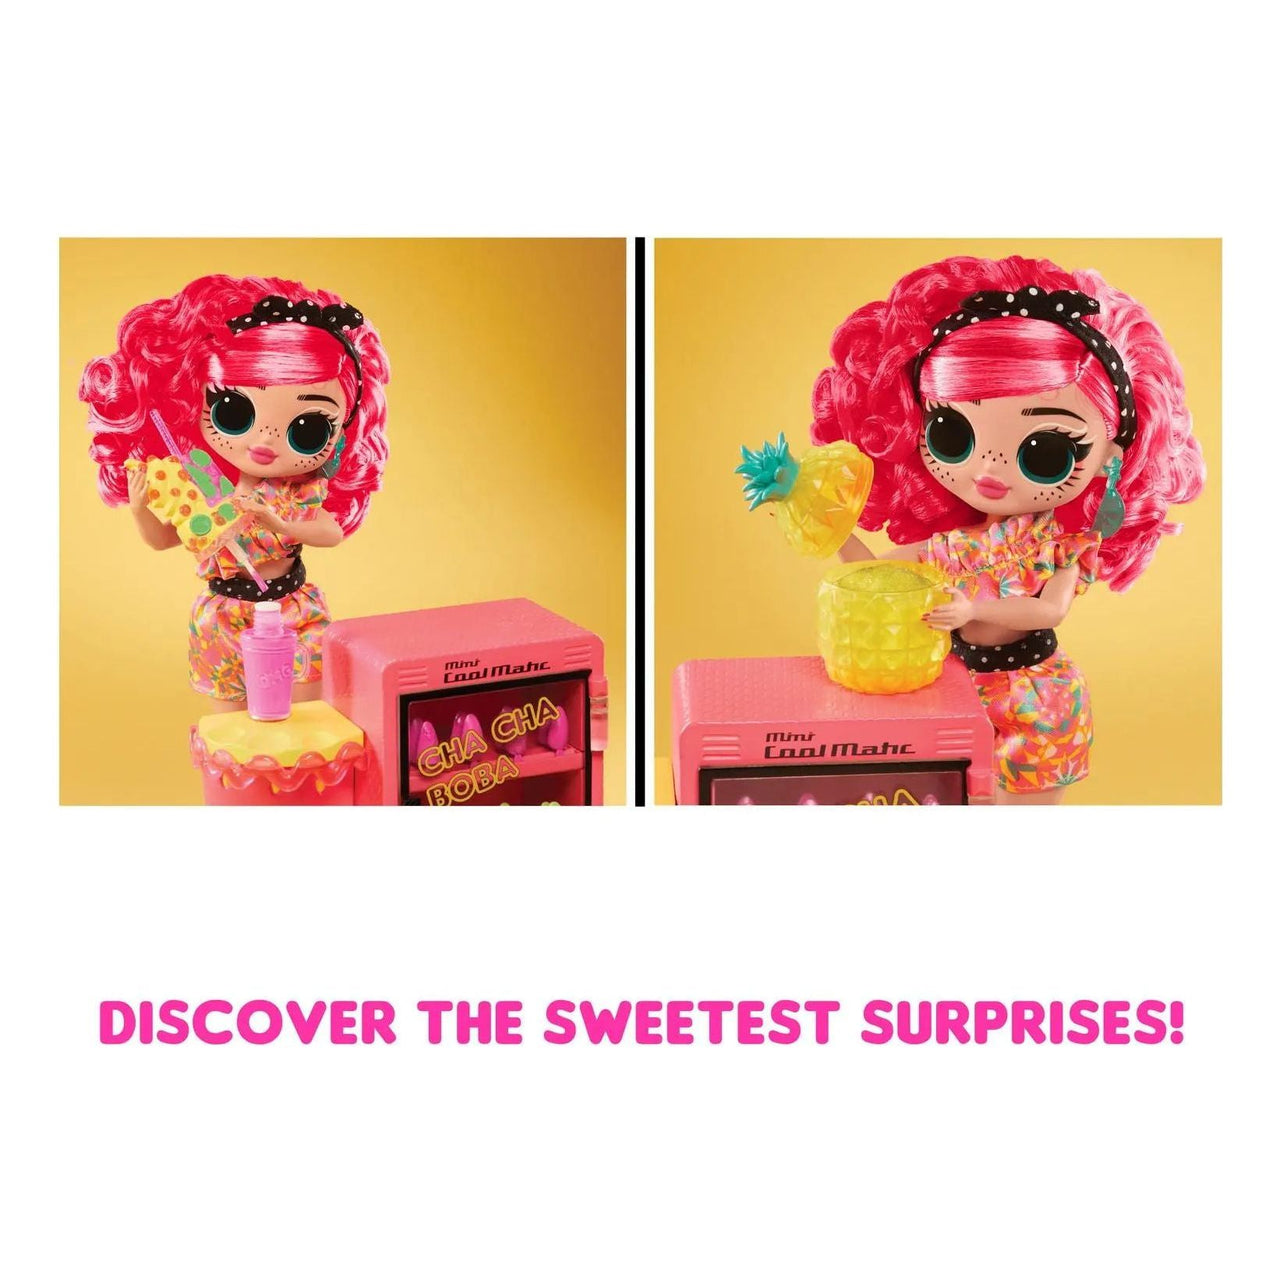 L.O.L Surprise OMG Sweet Nails Pinky Pops Doll LOL Surprise